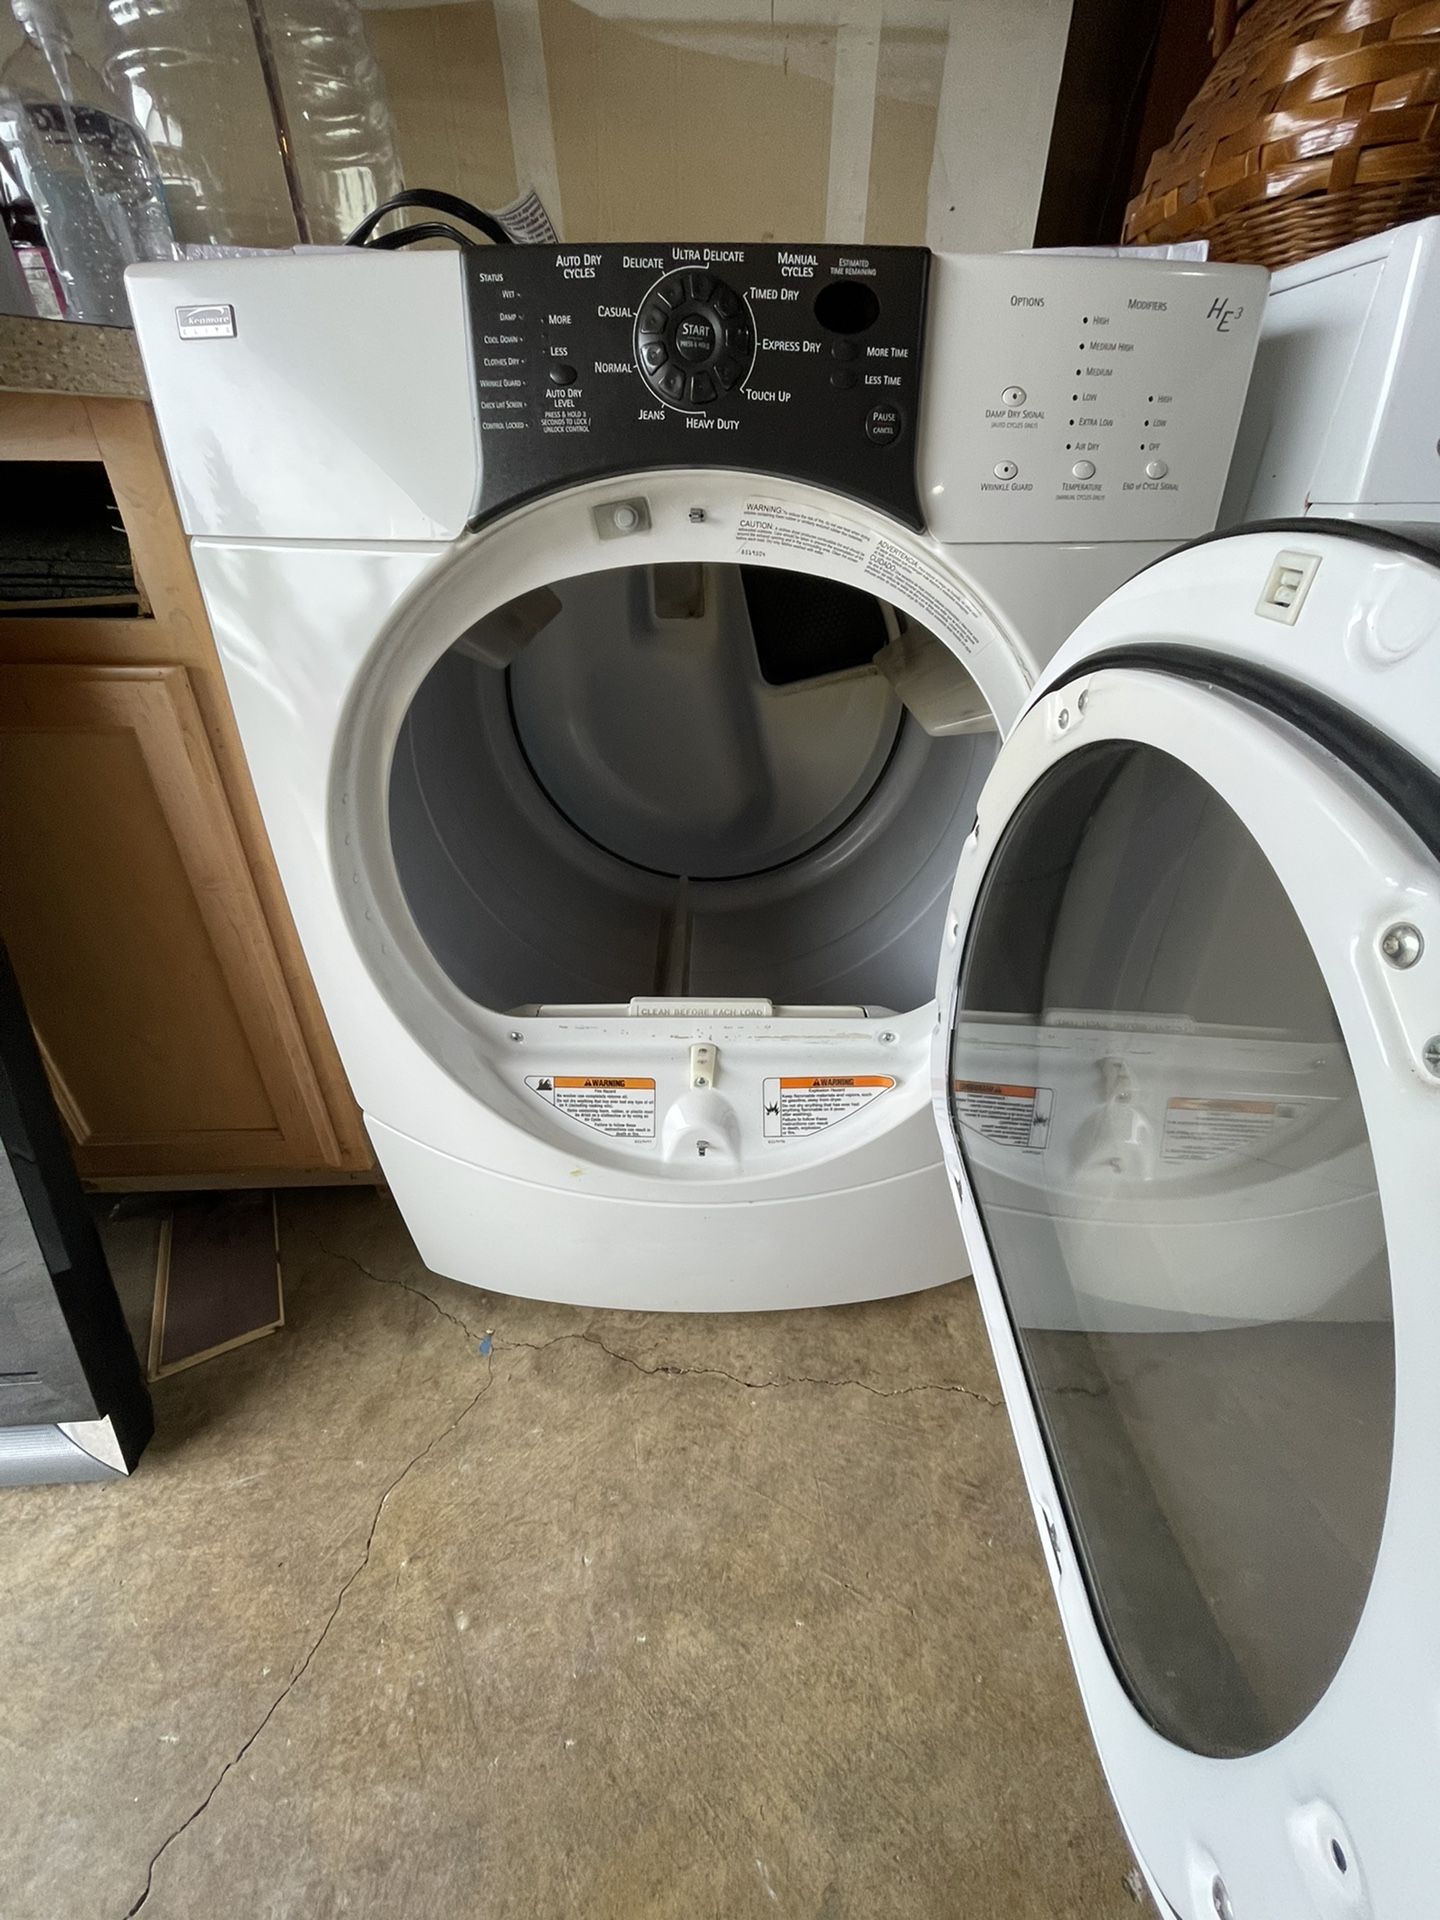 Kenmore Elite Washer And Dryer 